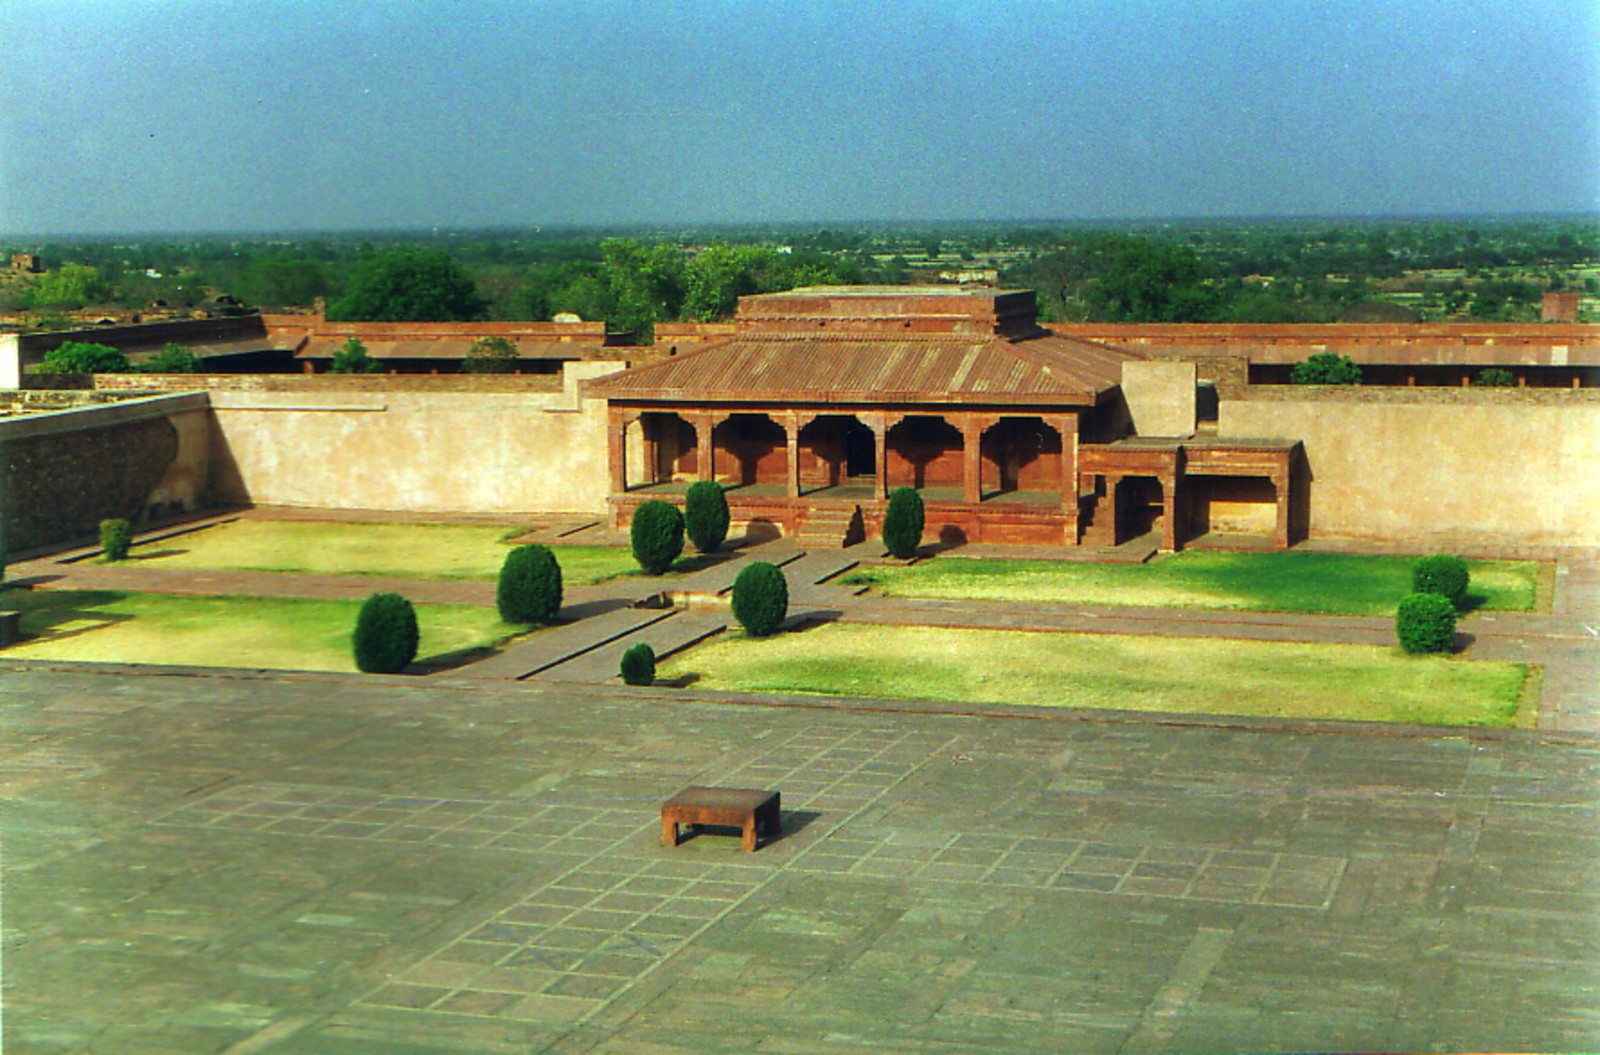 The main square of old Fatehpur Sikri